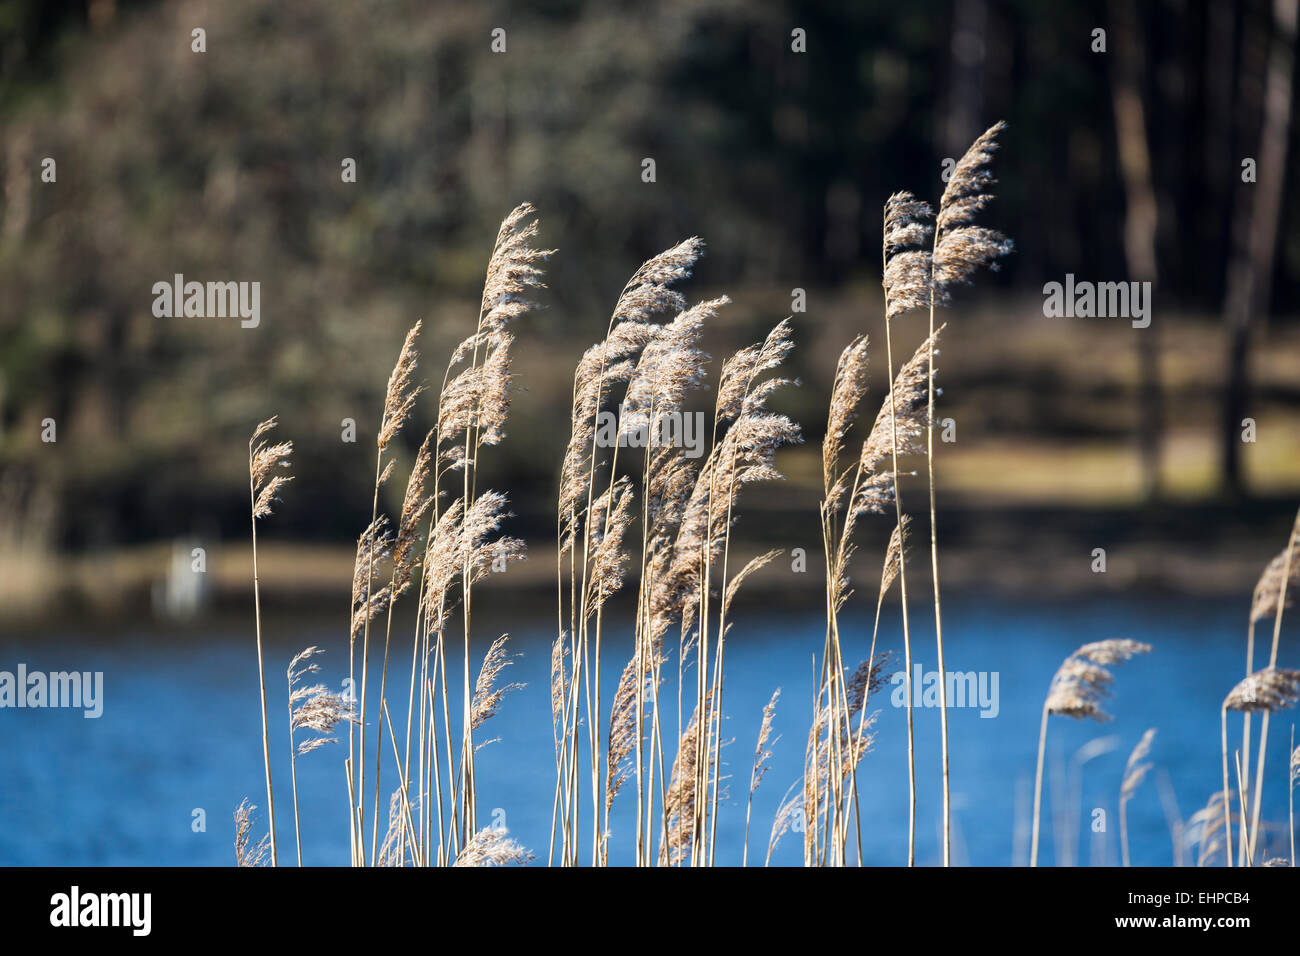 Delicate, grassy seed heads of reeds and lake background in Frensham Little Pond near Farnham, Surrey, UK Stock Photo